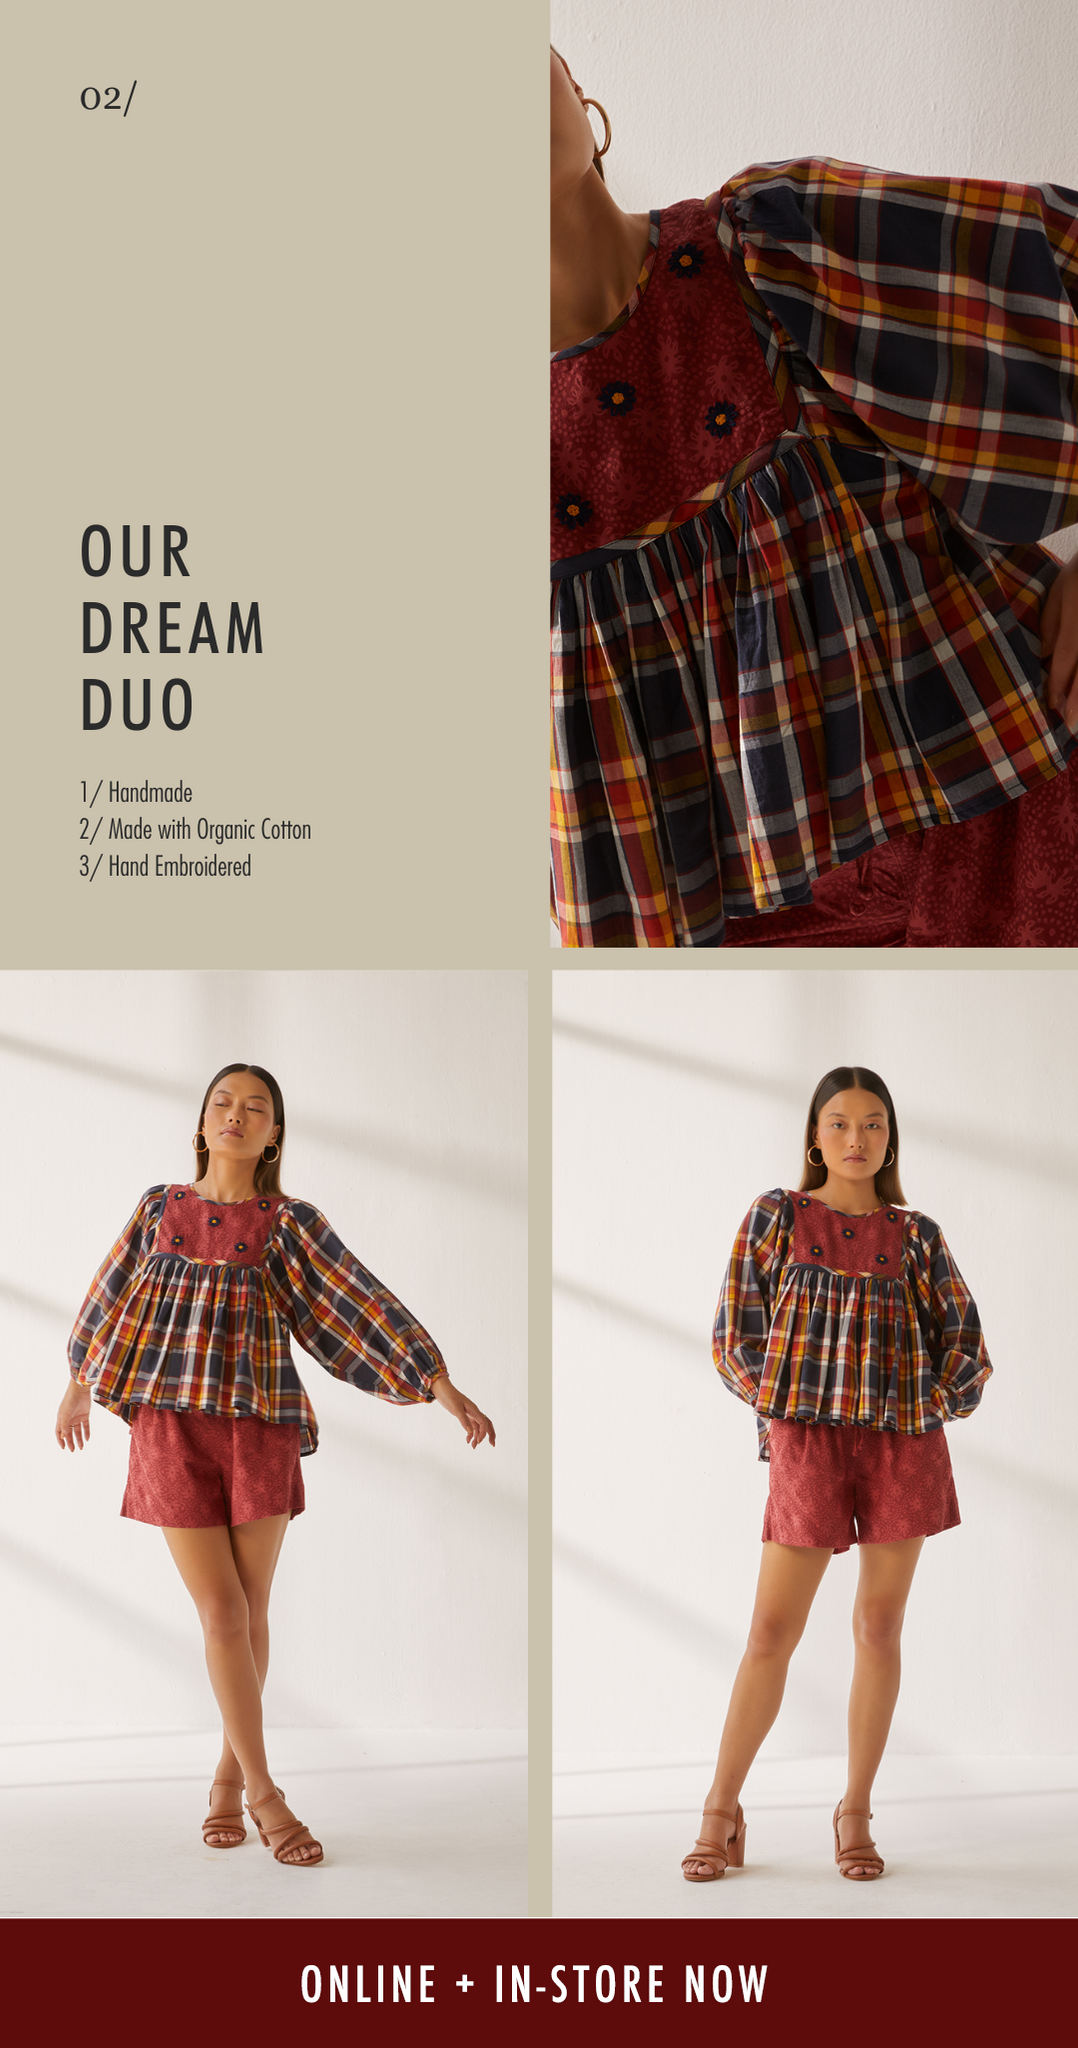 Our dream duo, Handmade, made with organic cotton, hand embroidered 